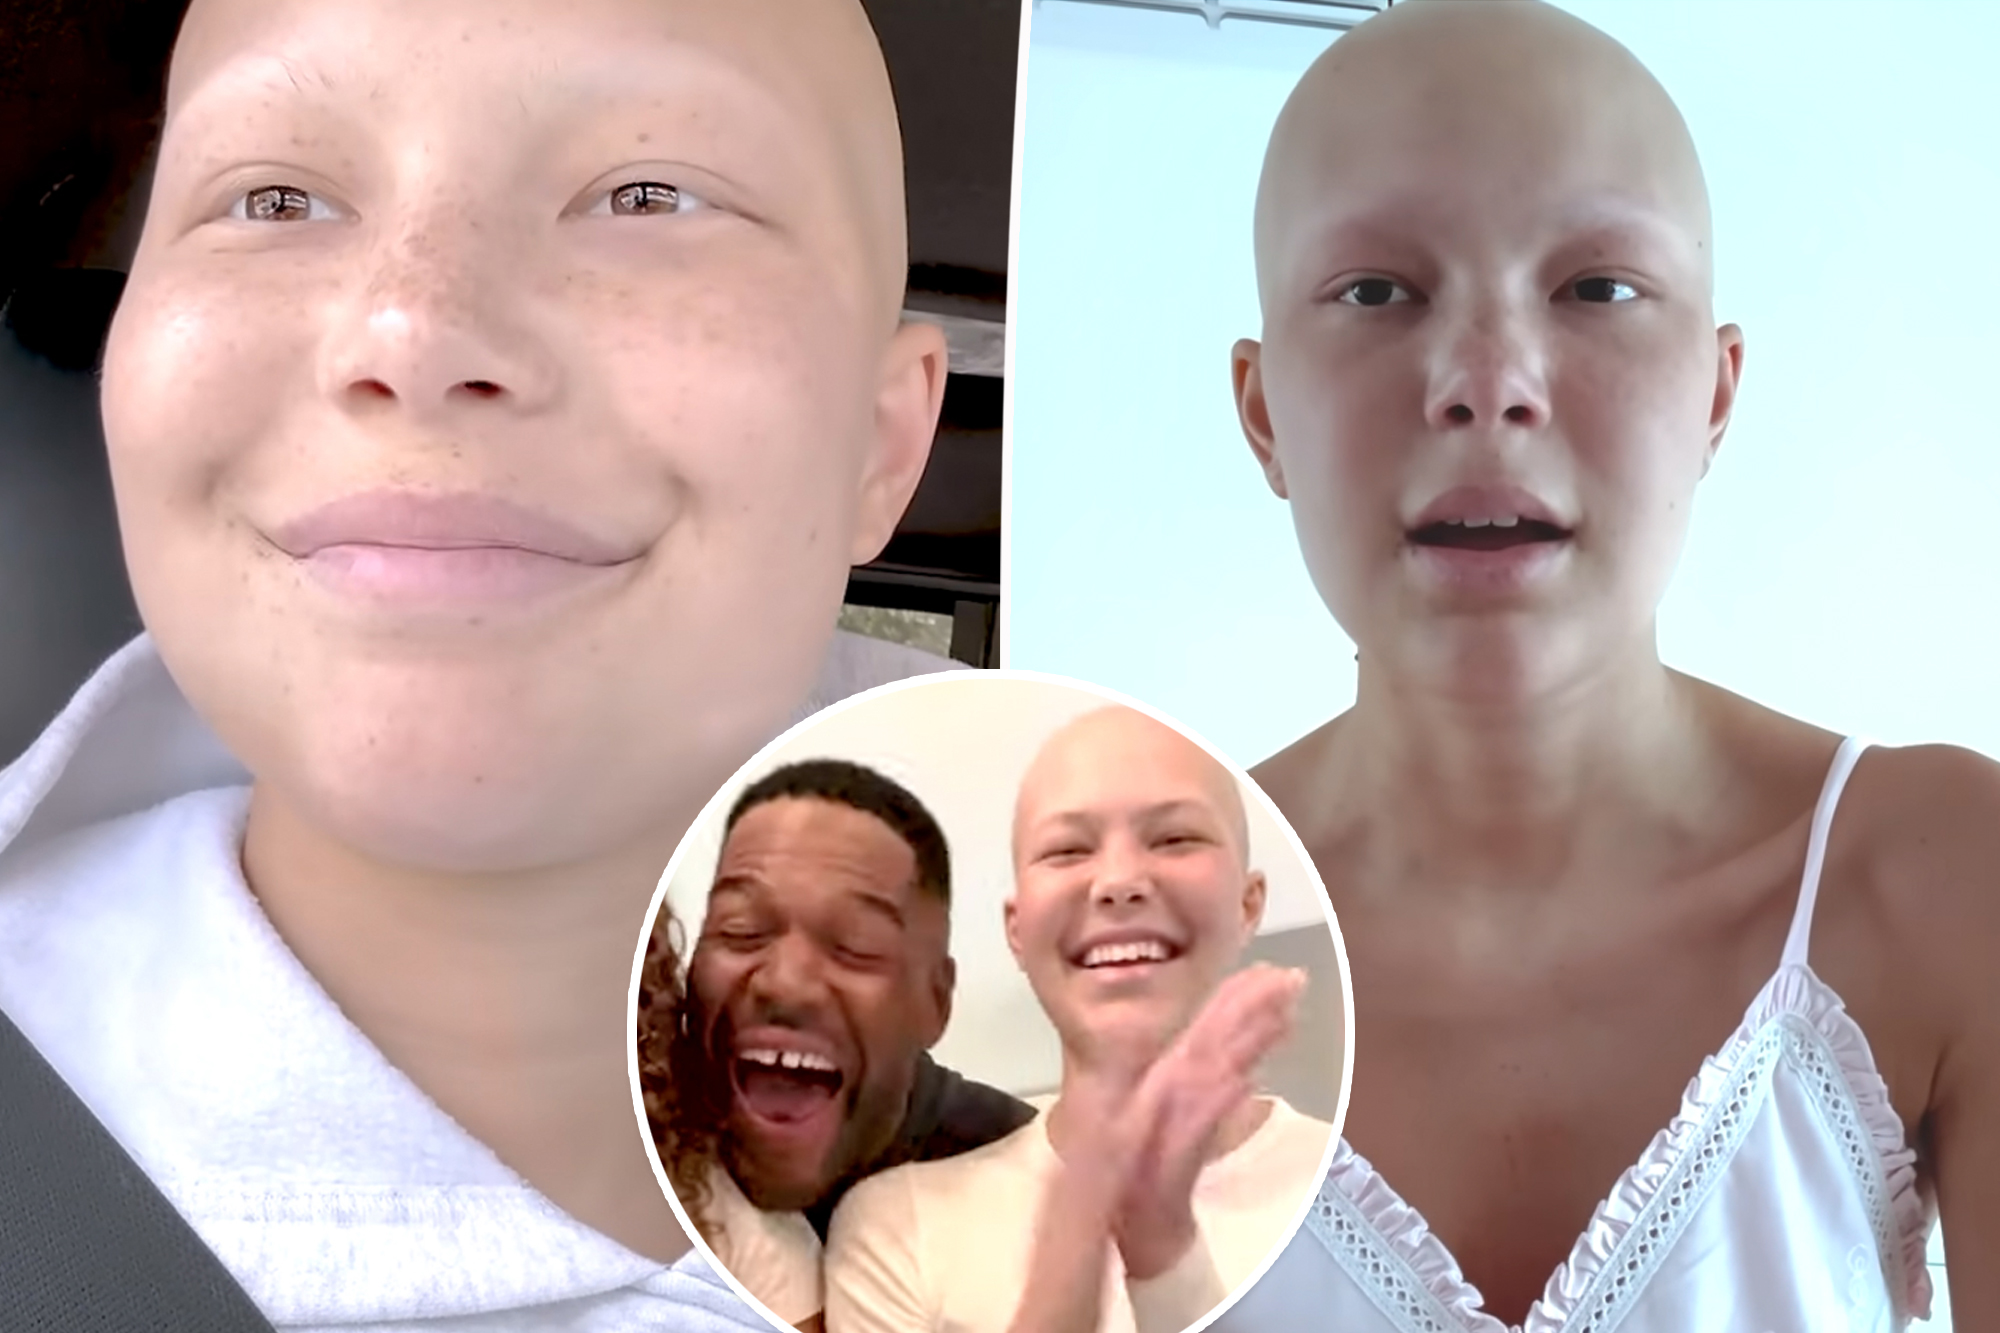 Michael Strahan's Daughter Is Cancer-Free: A Heartwarming Journey of Triumph